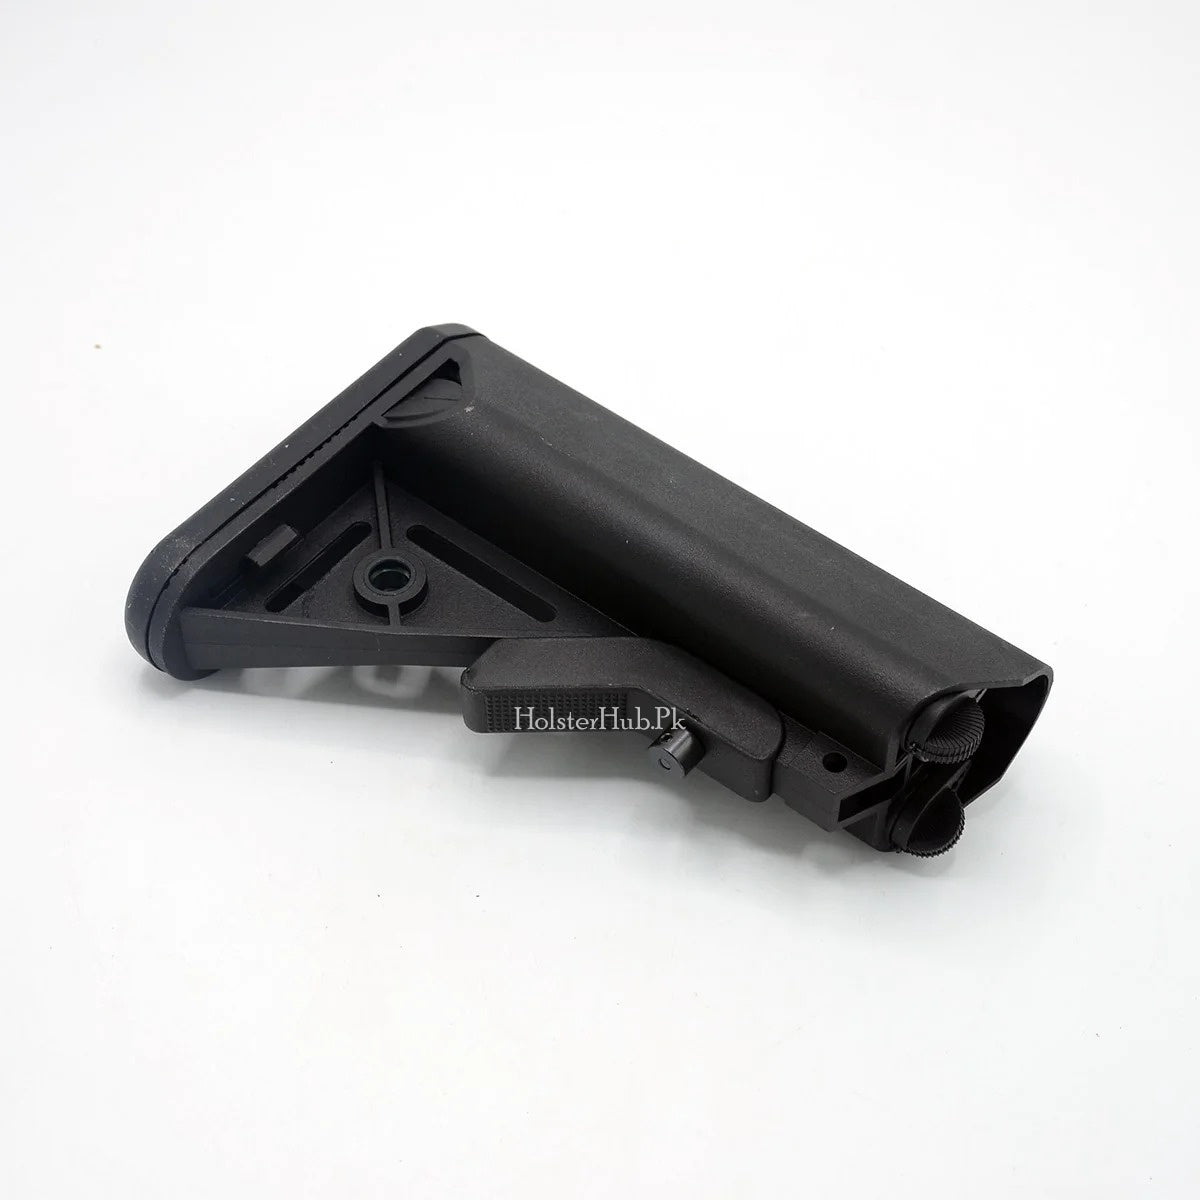 M4 Polymer Buttstock - Lightweight, Durable, and Adjustable for Customized Comfort